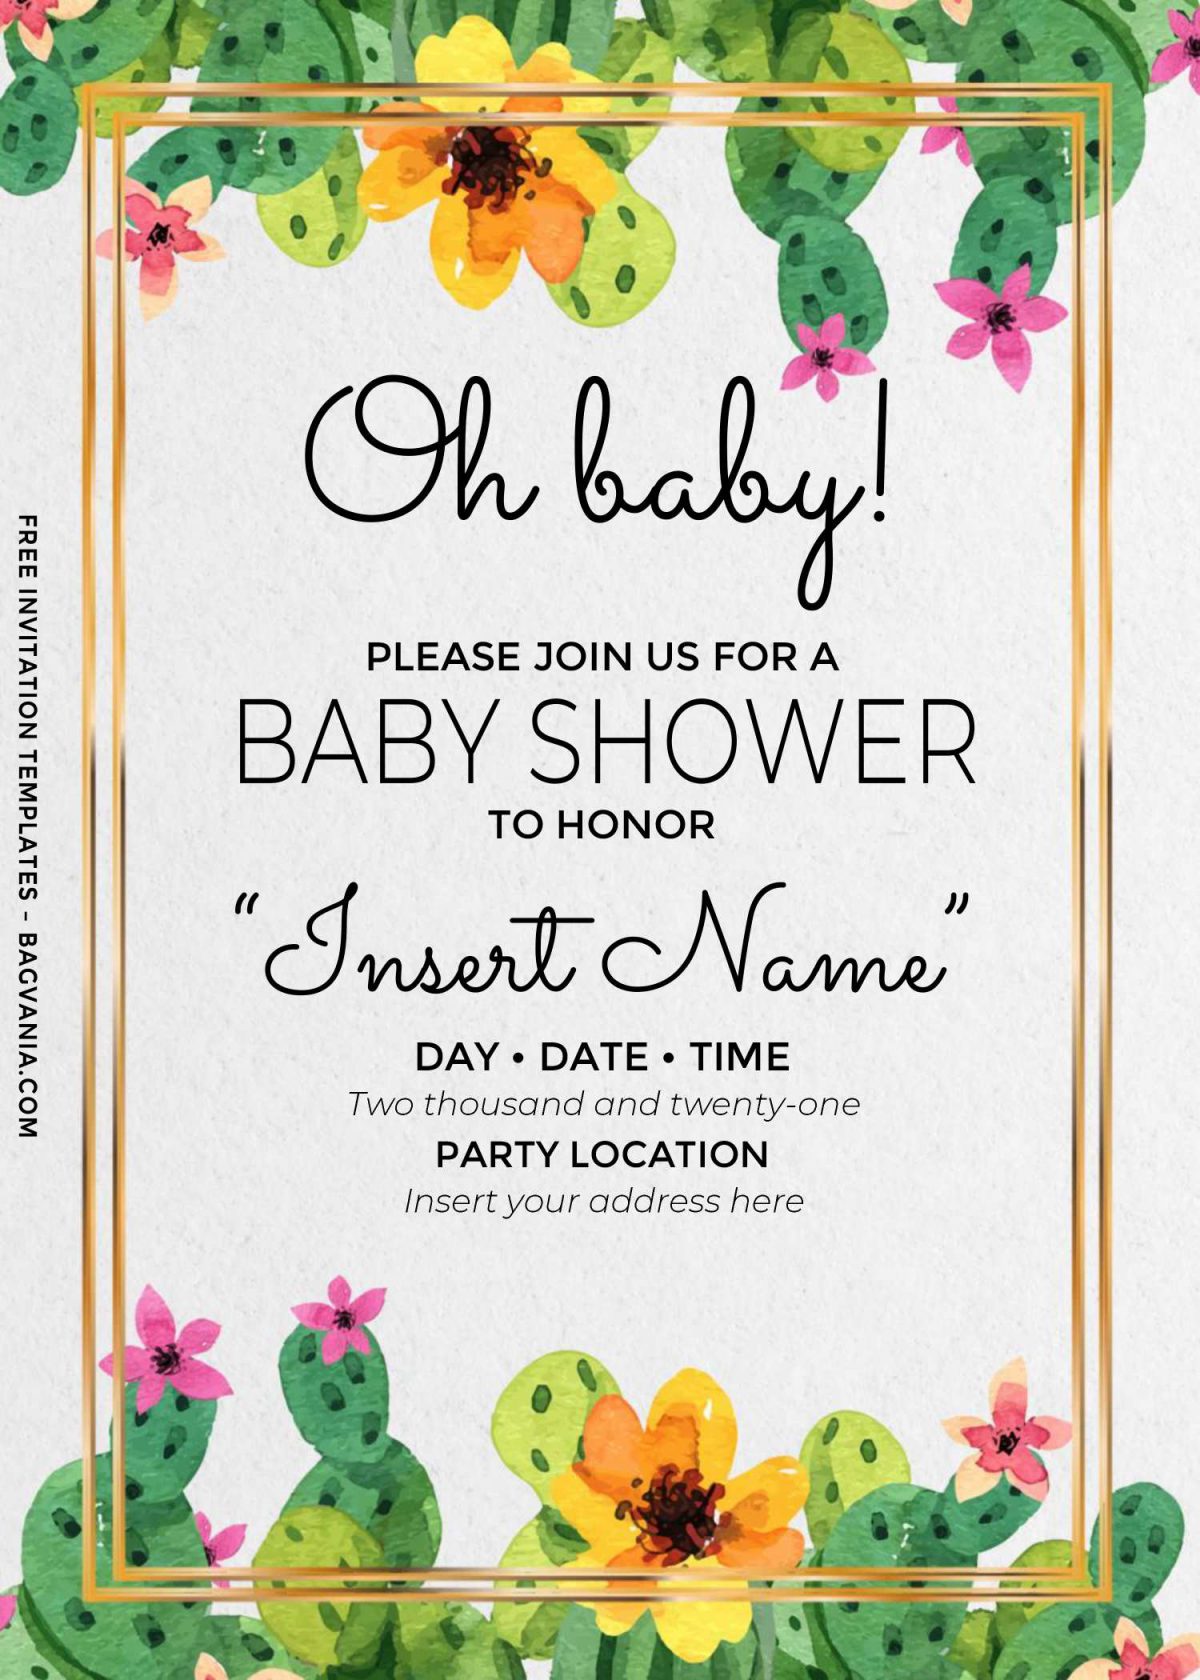 Free Oh Baby Cactus Birthday Invitation Templates For Word and has portrait orientation card design and rustic background